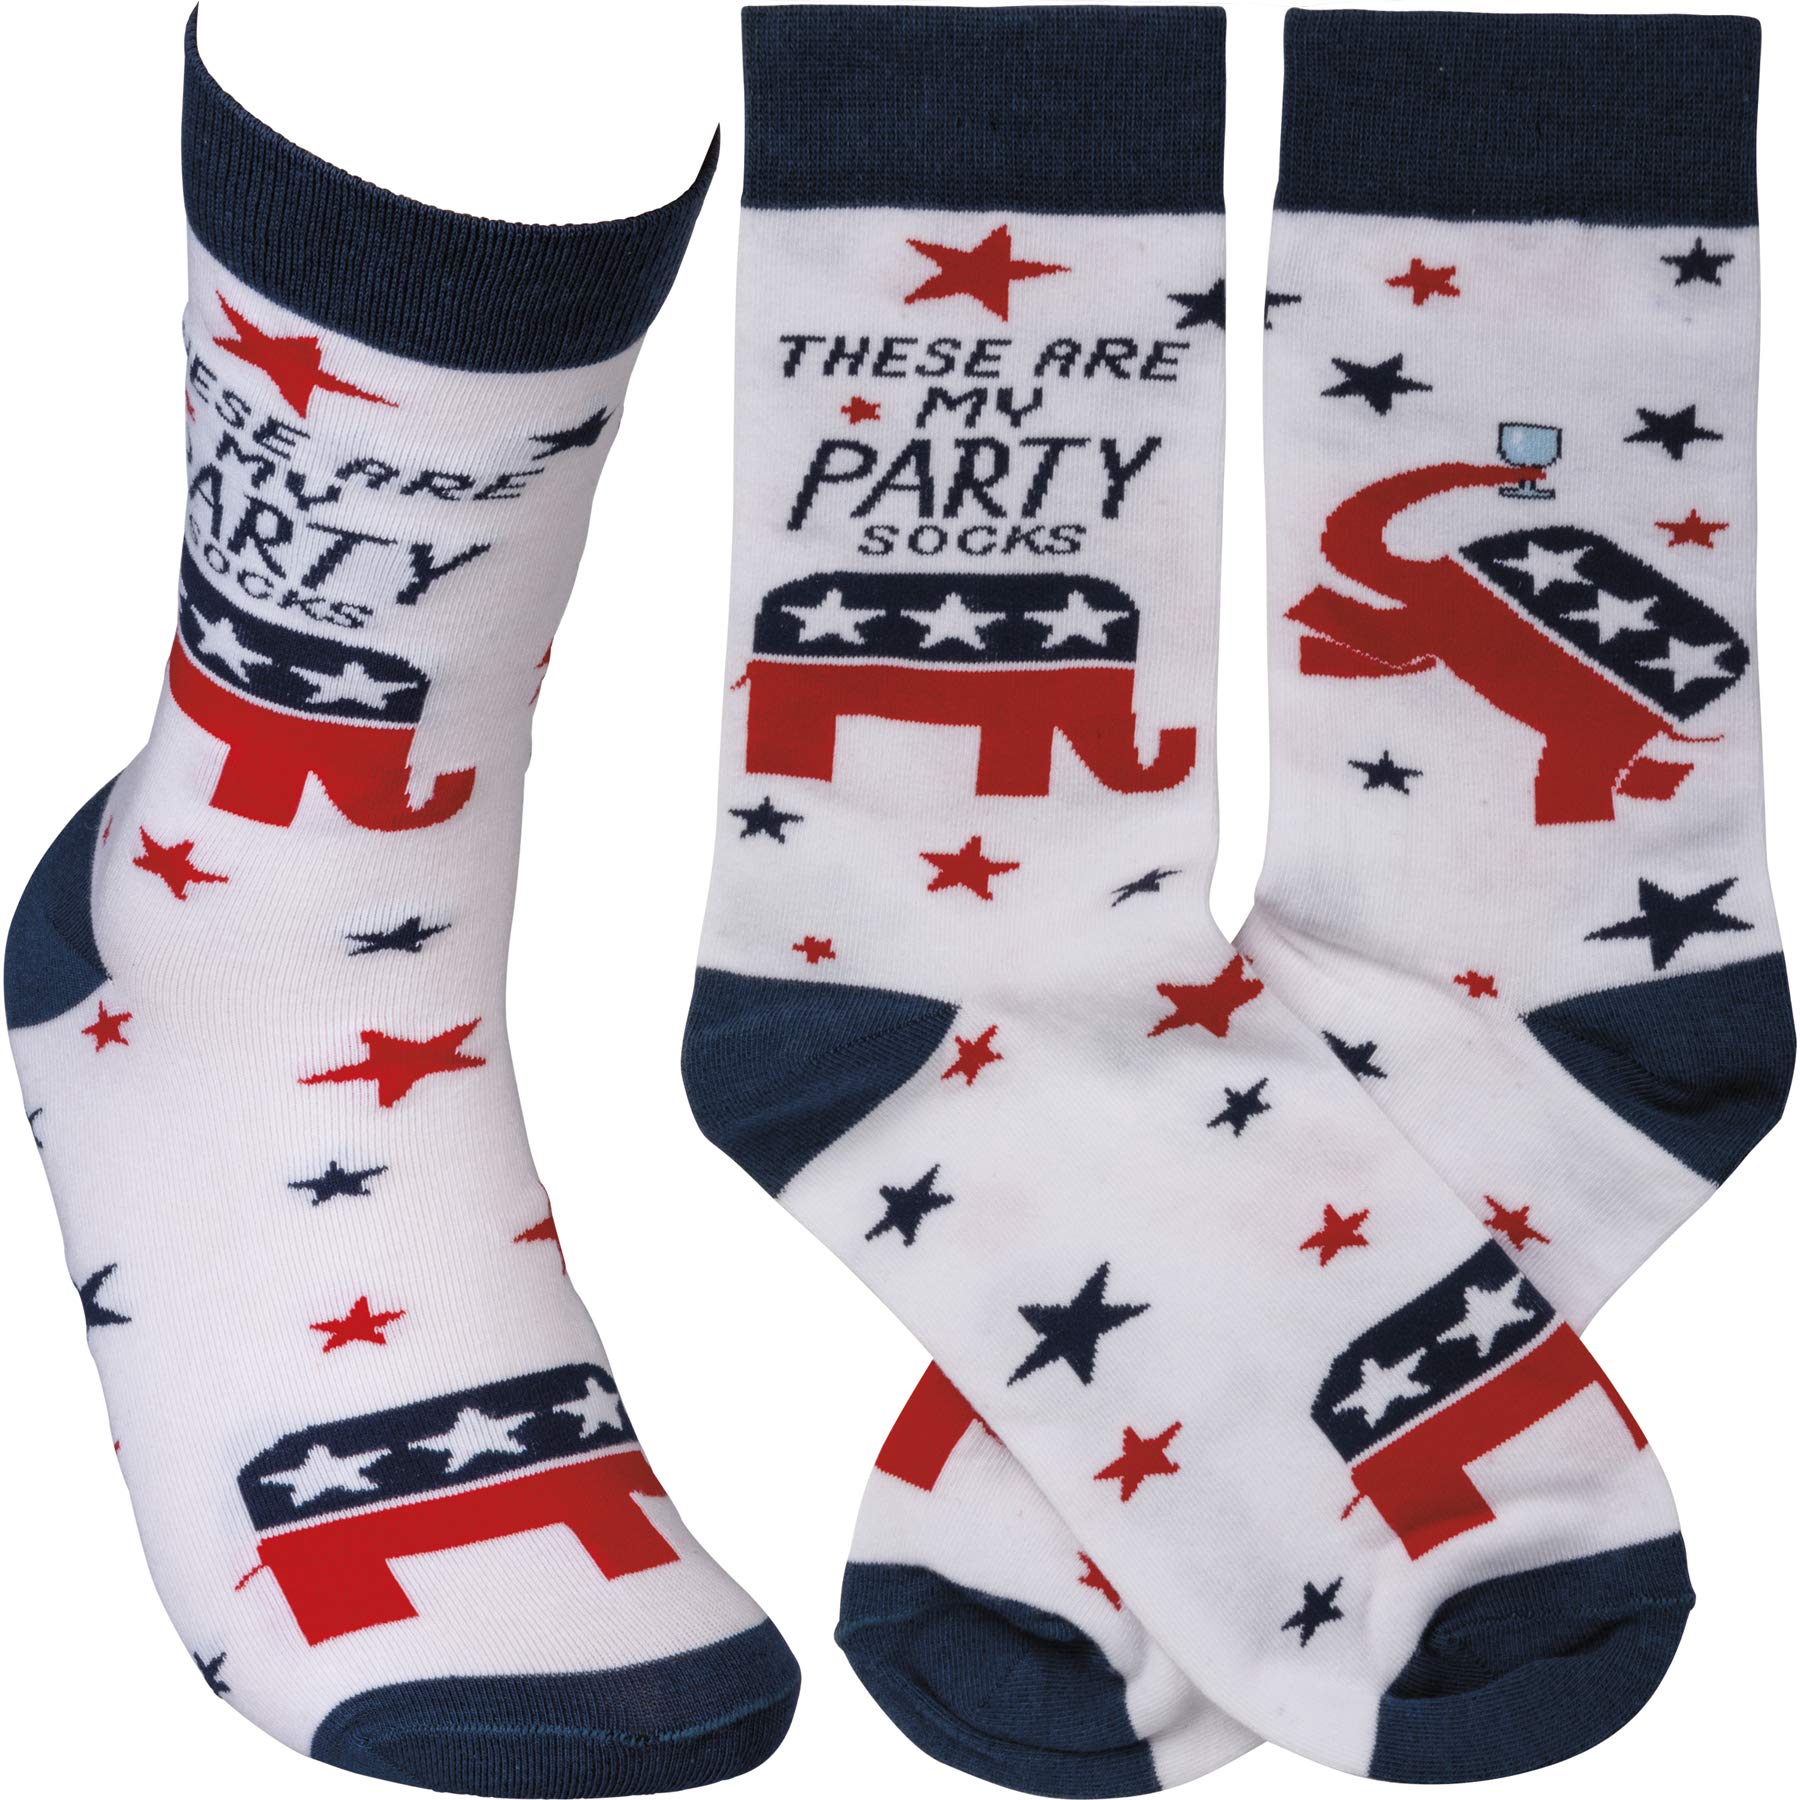 Primitives by Kathy One Size Socks Republican Party Socks